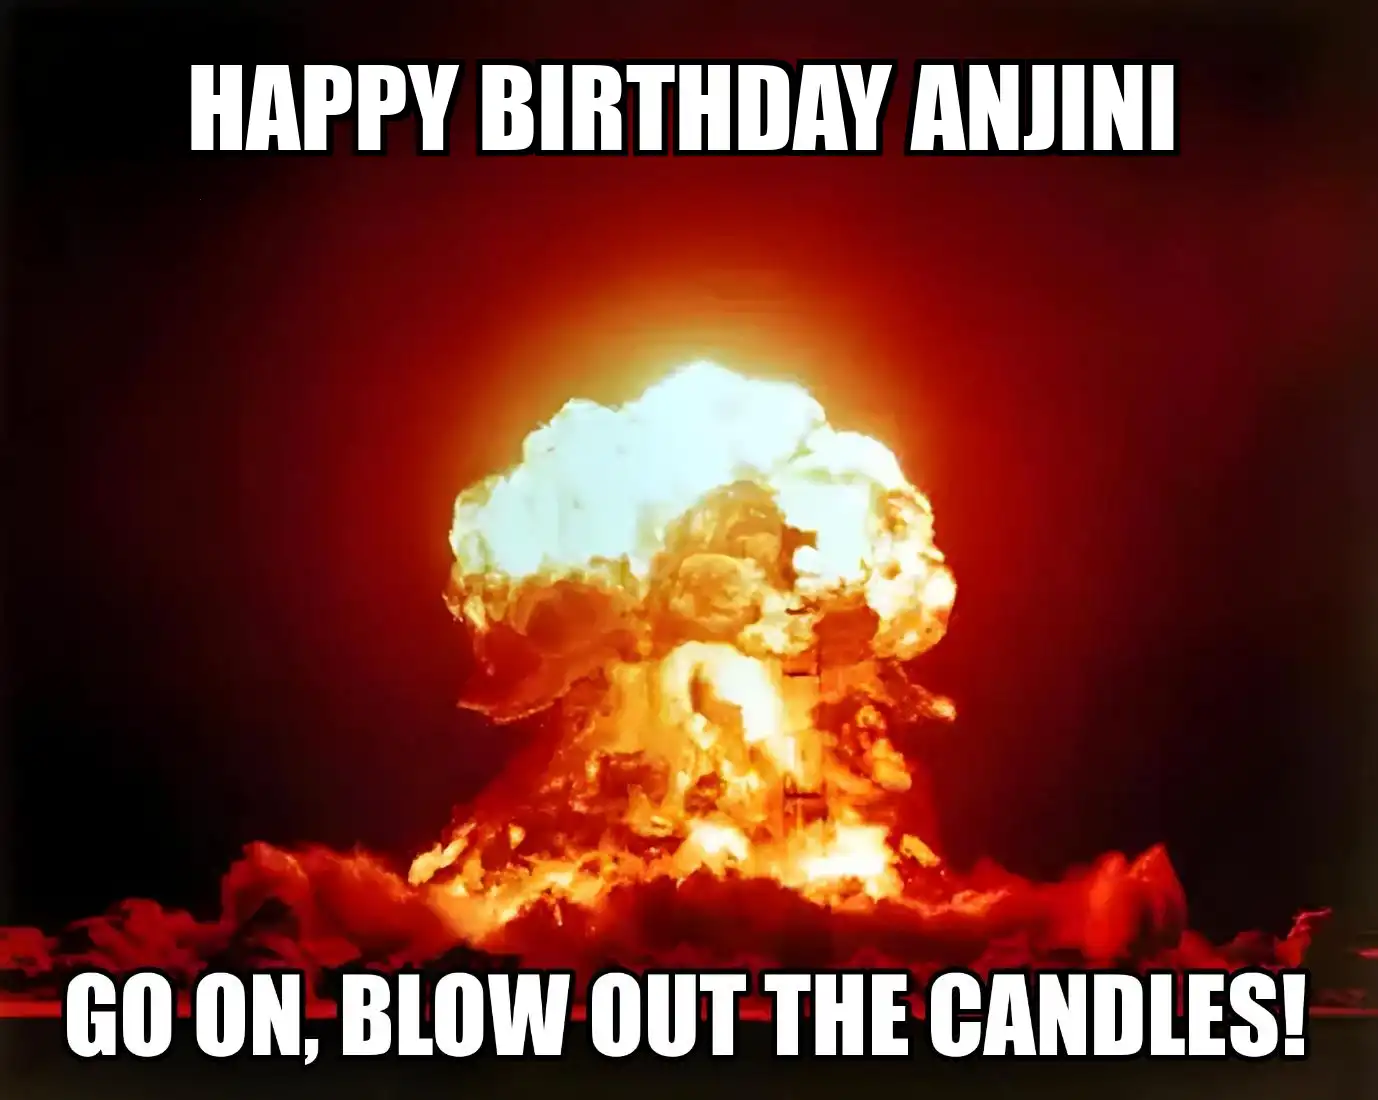 Happy Birthday Anjini Go On Blow Out The Candles Meme